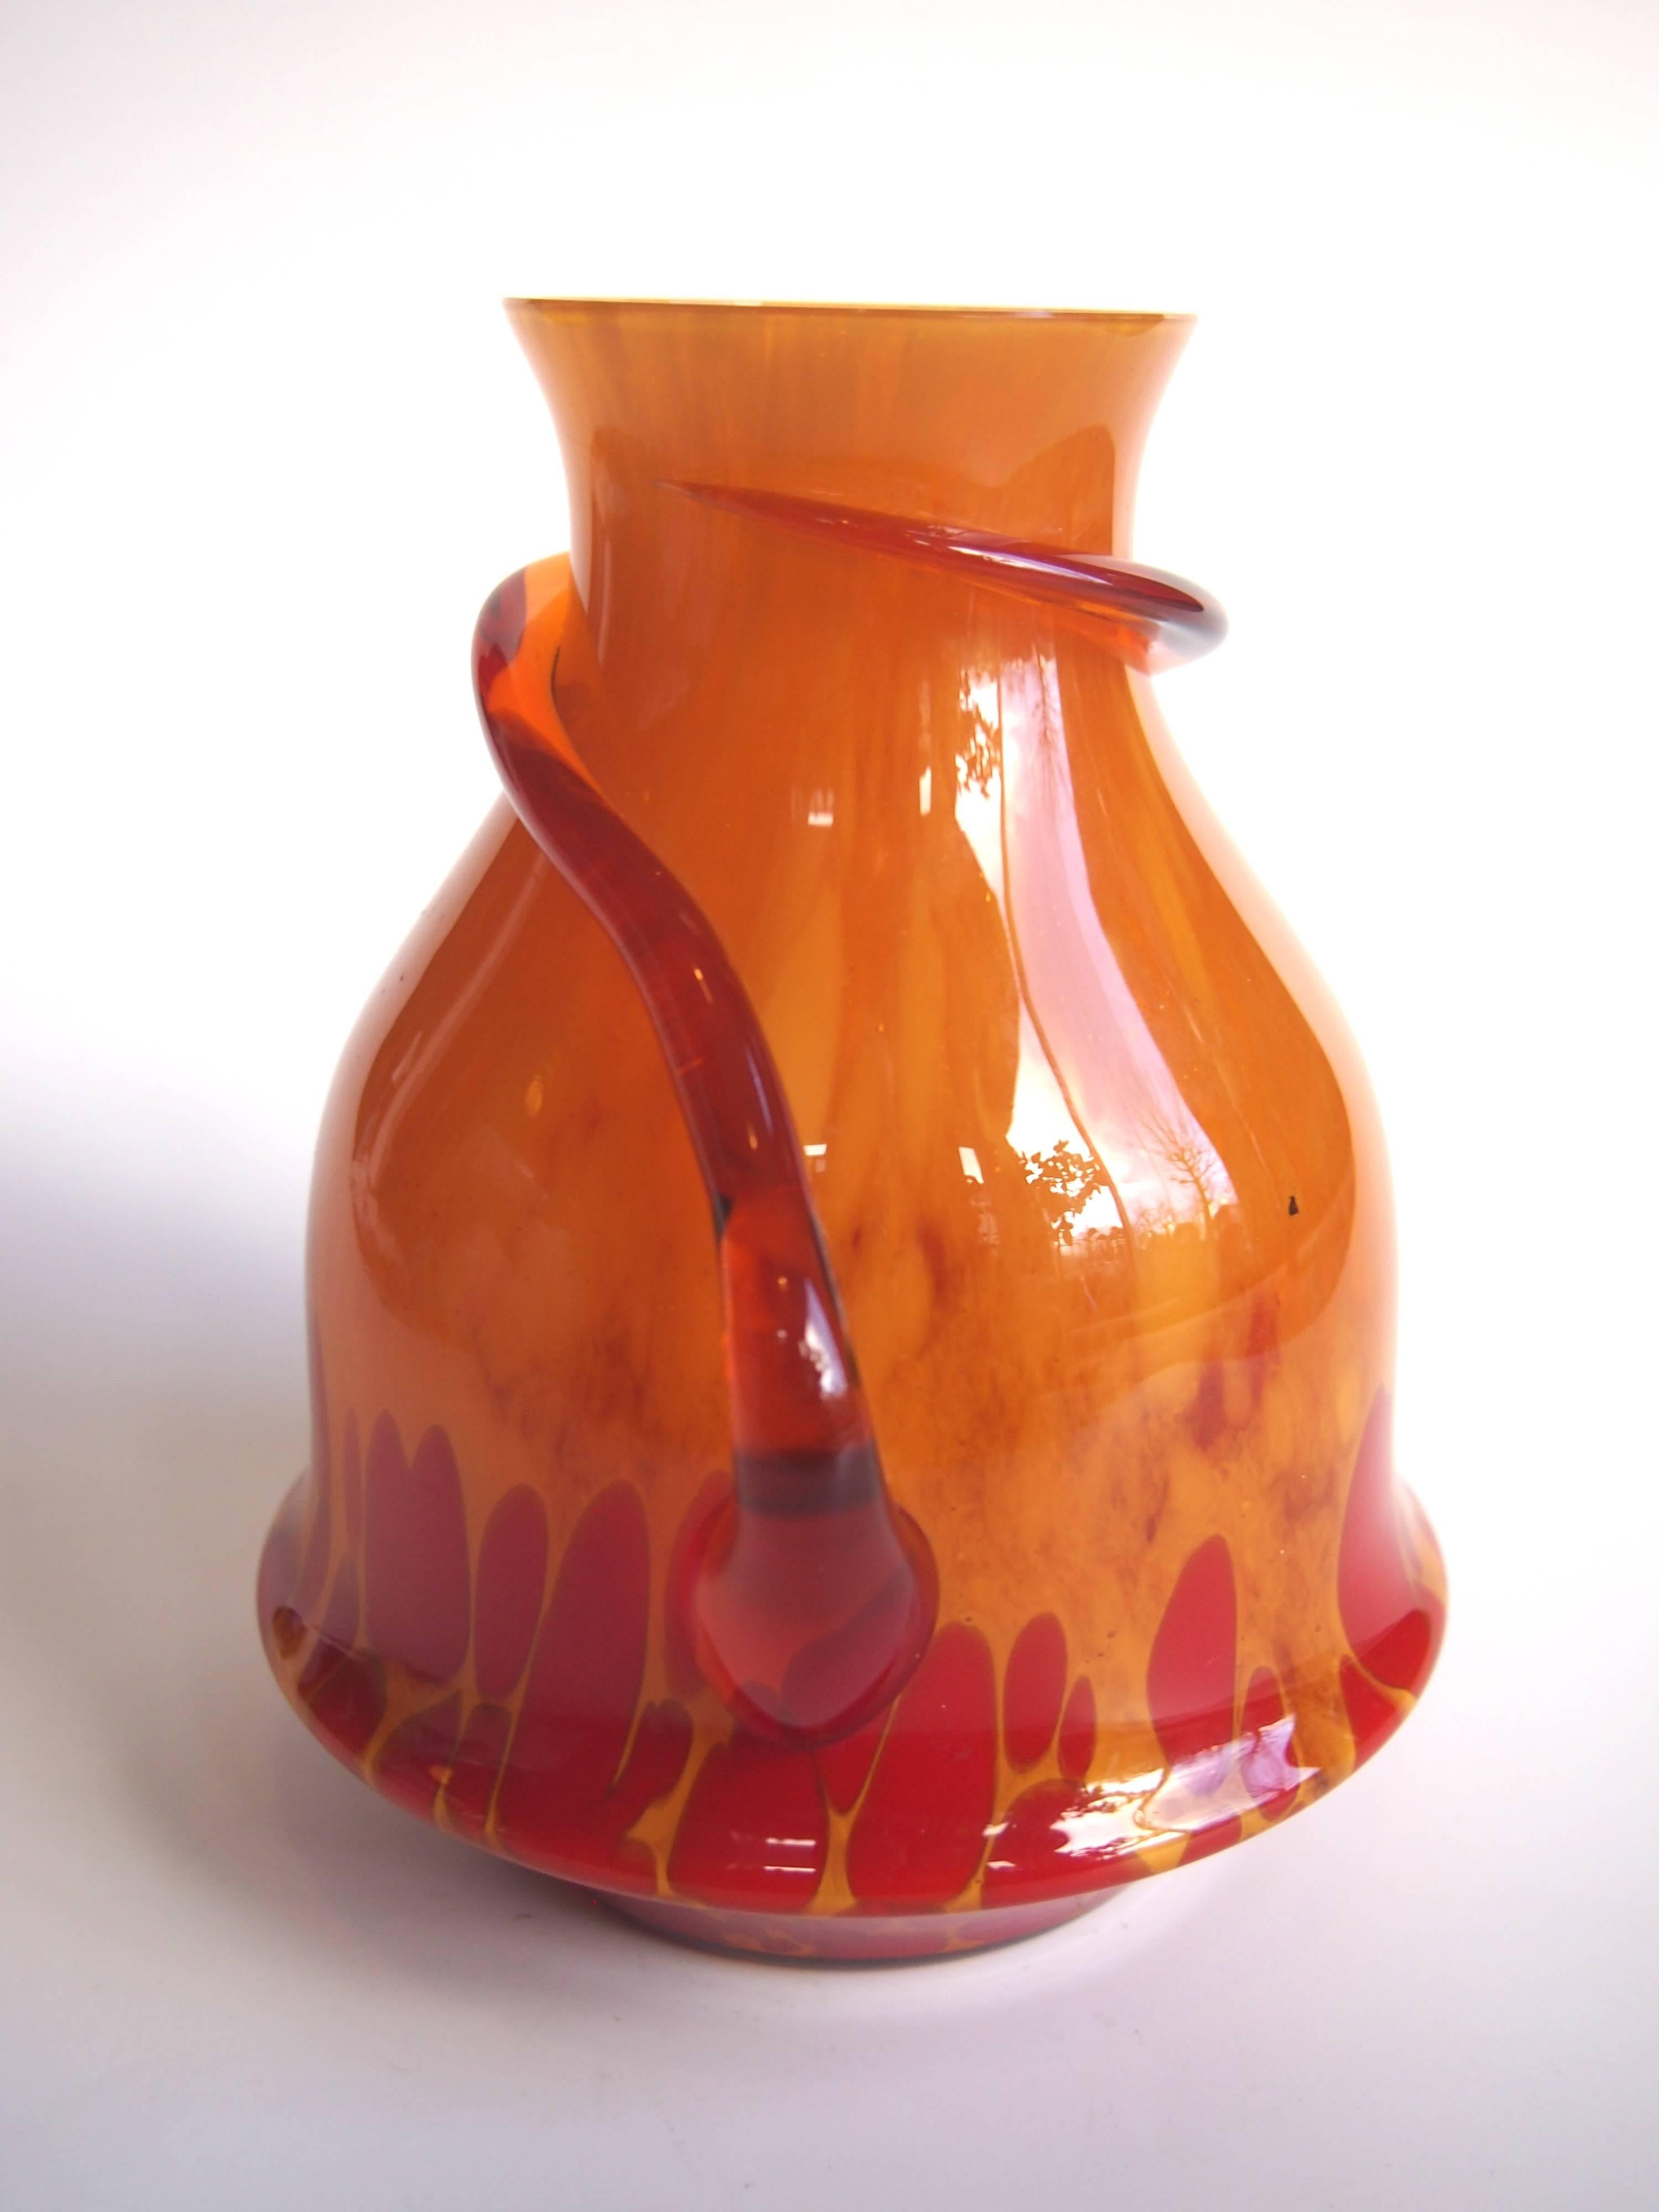 Unusual red over cased amber Kralik vase with hot applied handles wrapped around the vase.

Kralik was at the time one of the largest Bohemian glass makers only a few miles down the road from Loetz. Along with their brother company (Meyr's Neffe)